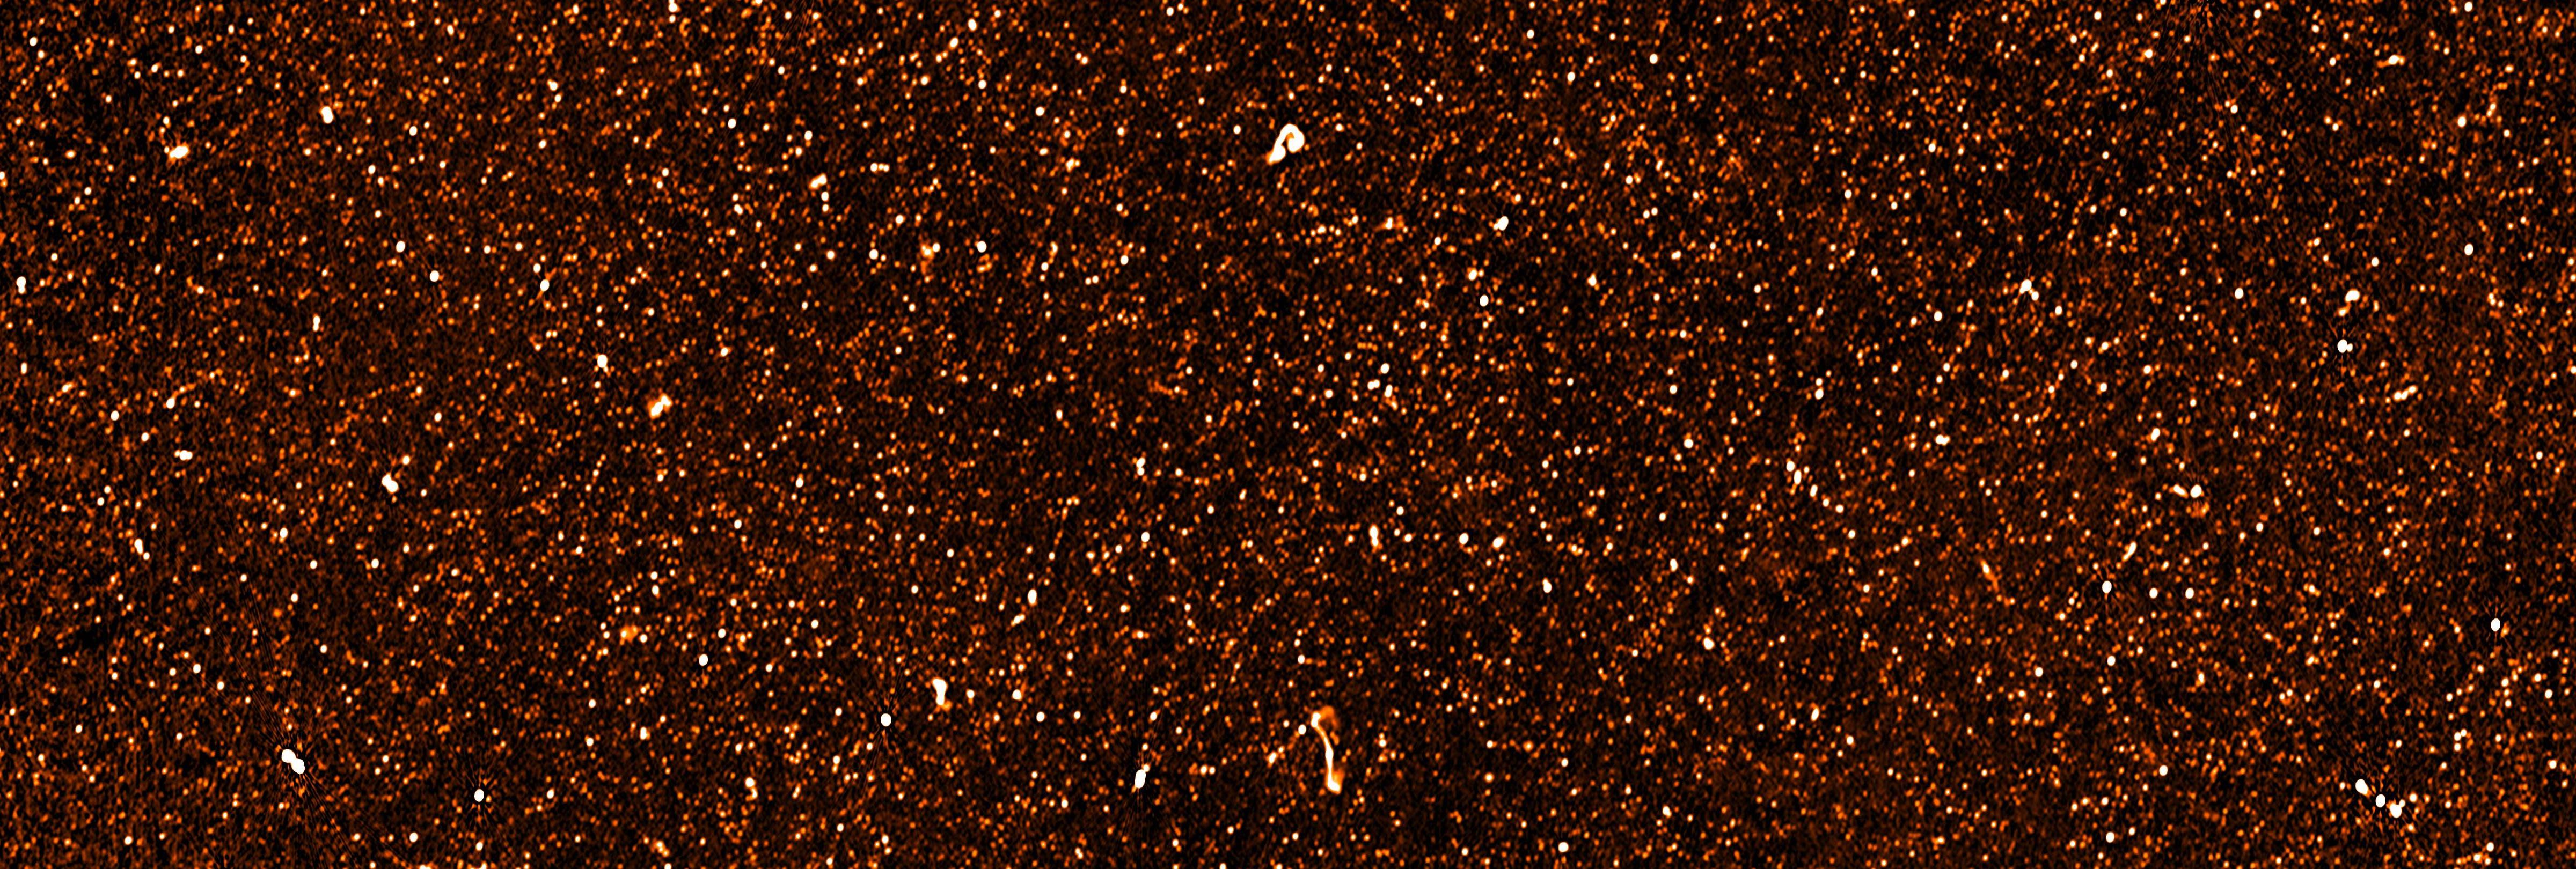 A subset of the MIGHTEE COSMOS mosaic showing many thousands of extragalactic radio sources.